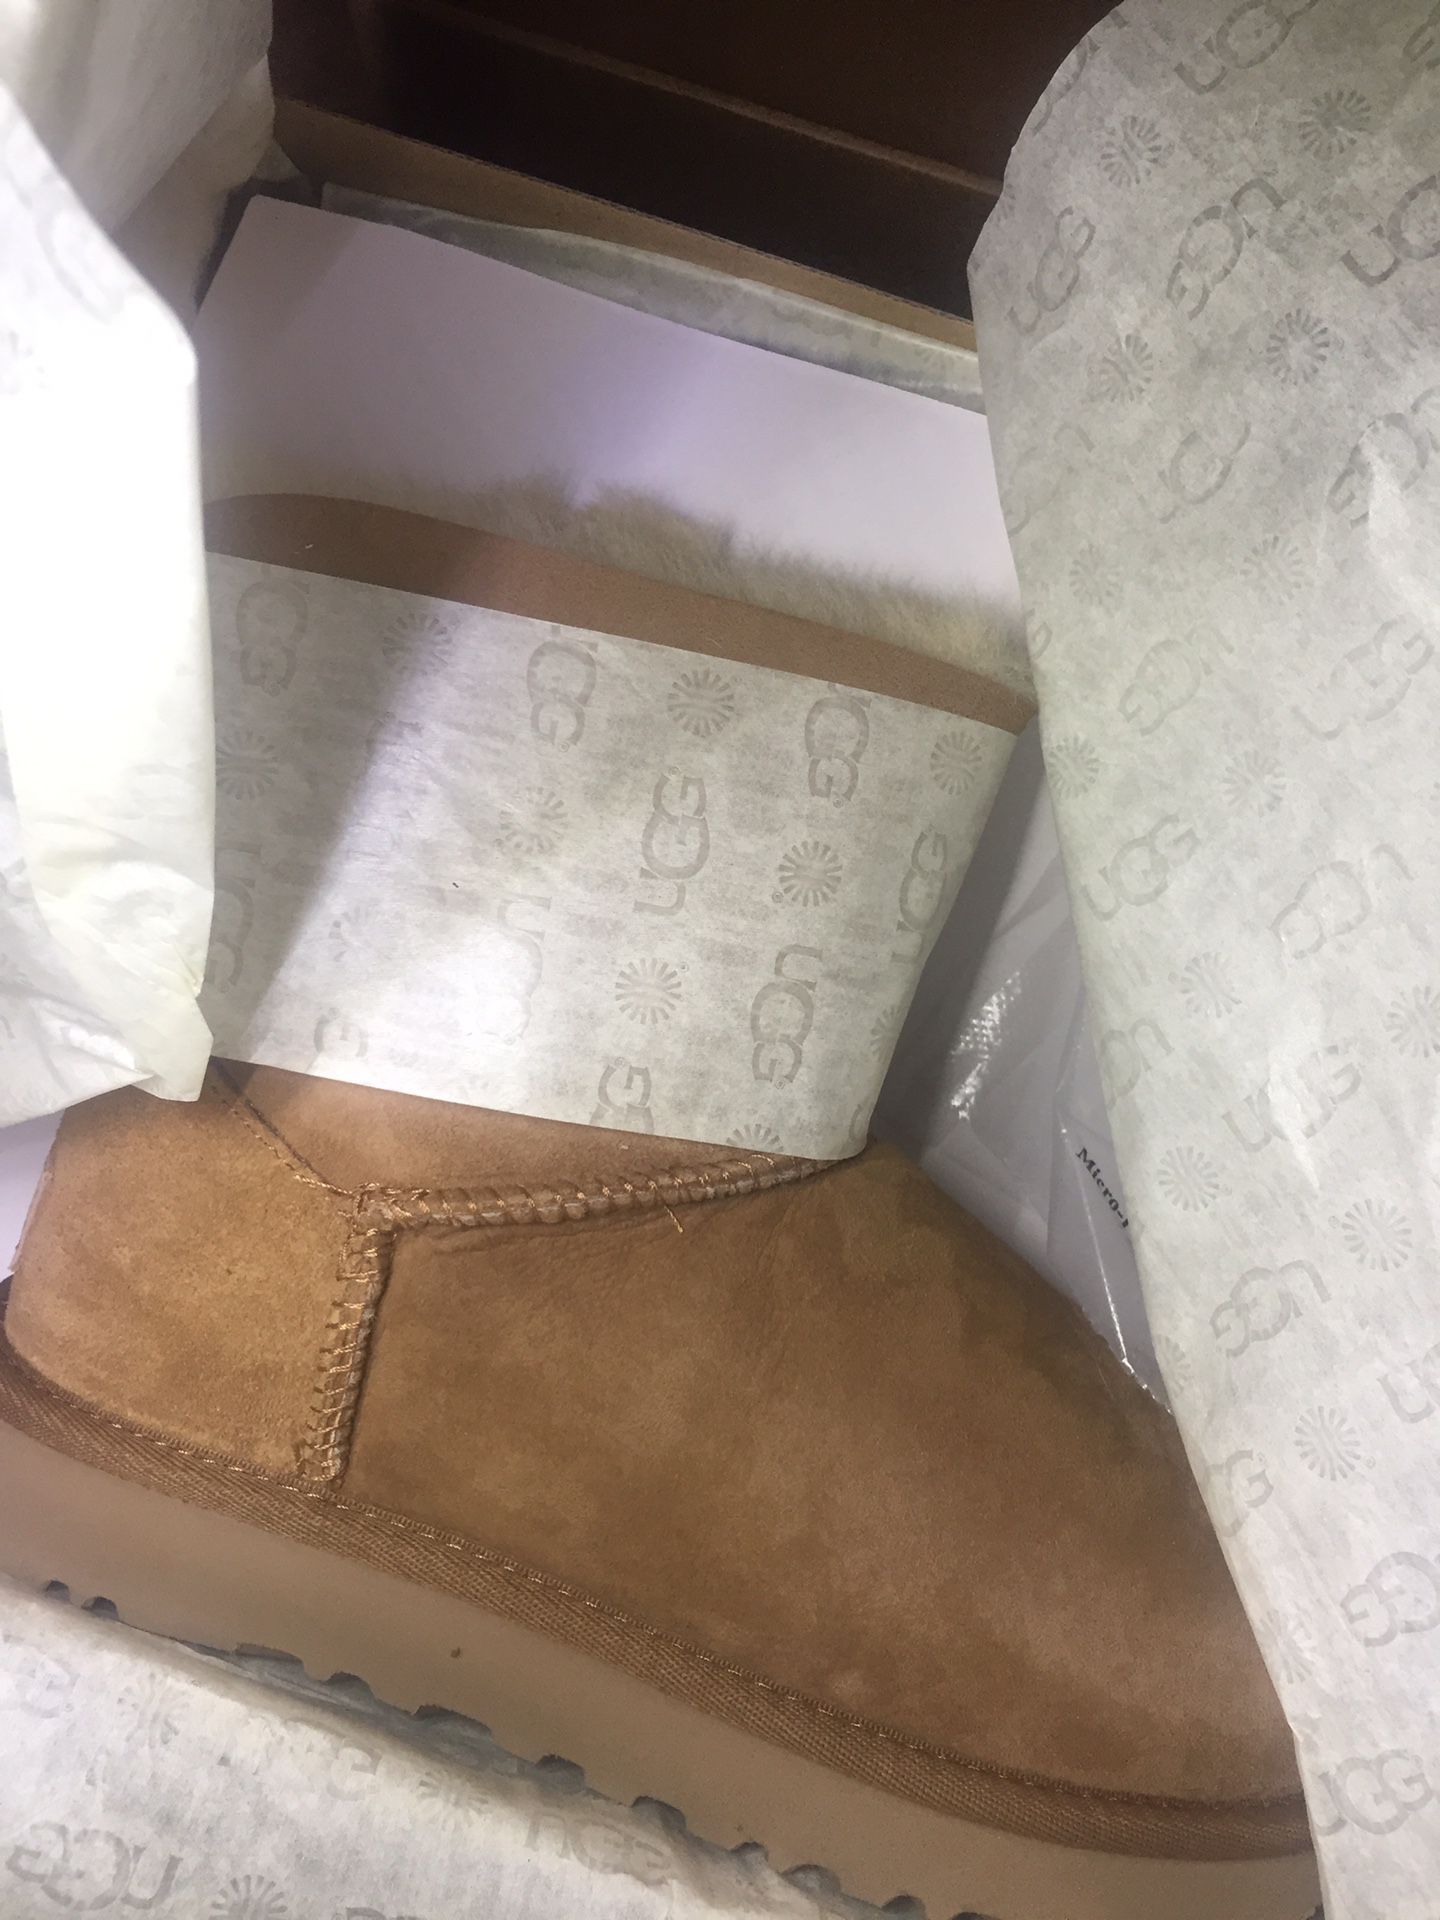 Uggs size 6 brand new